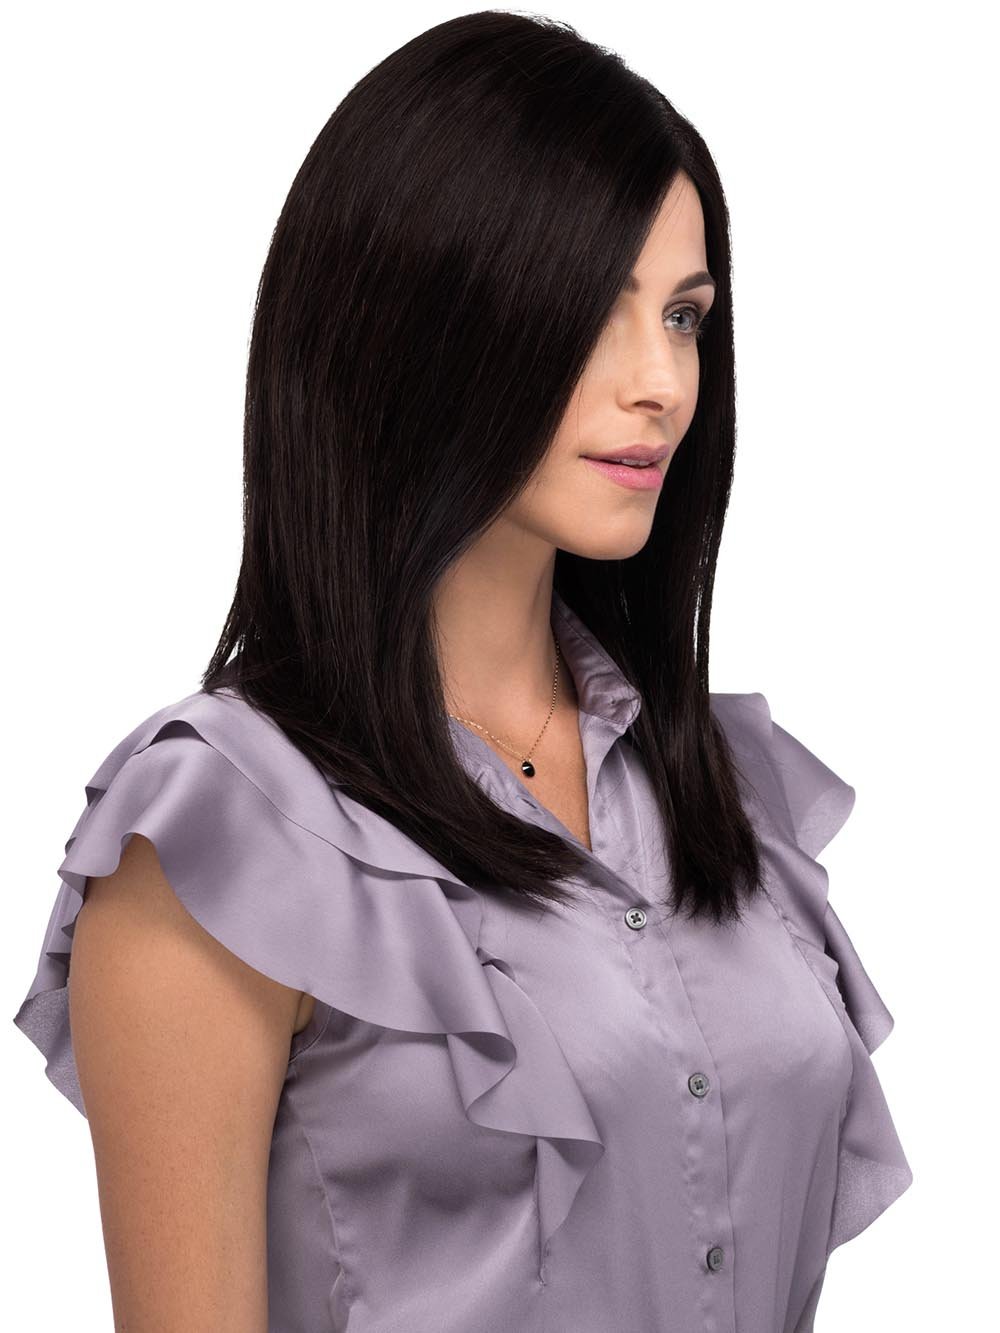 Venus by Estetica is the embodiment of beauty. It is a long style cut with long layers and made of luxuriously silky and smooth Remi human hair